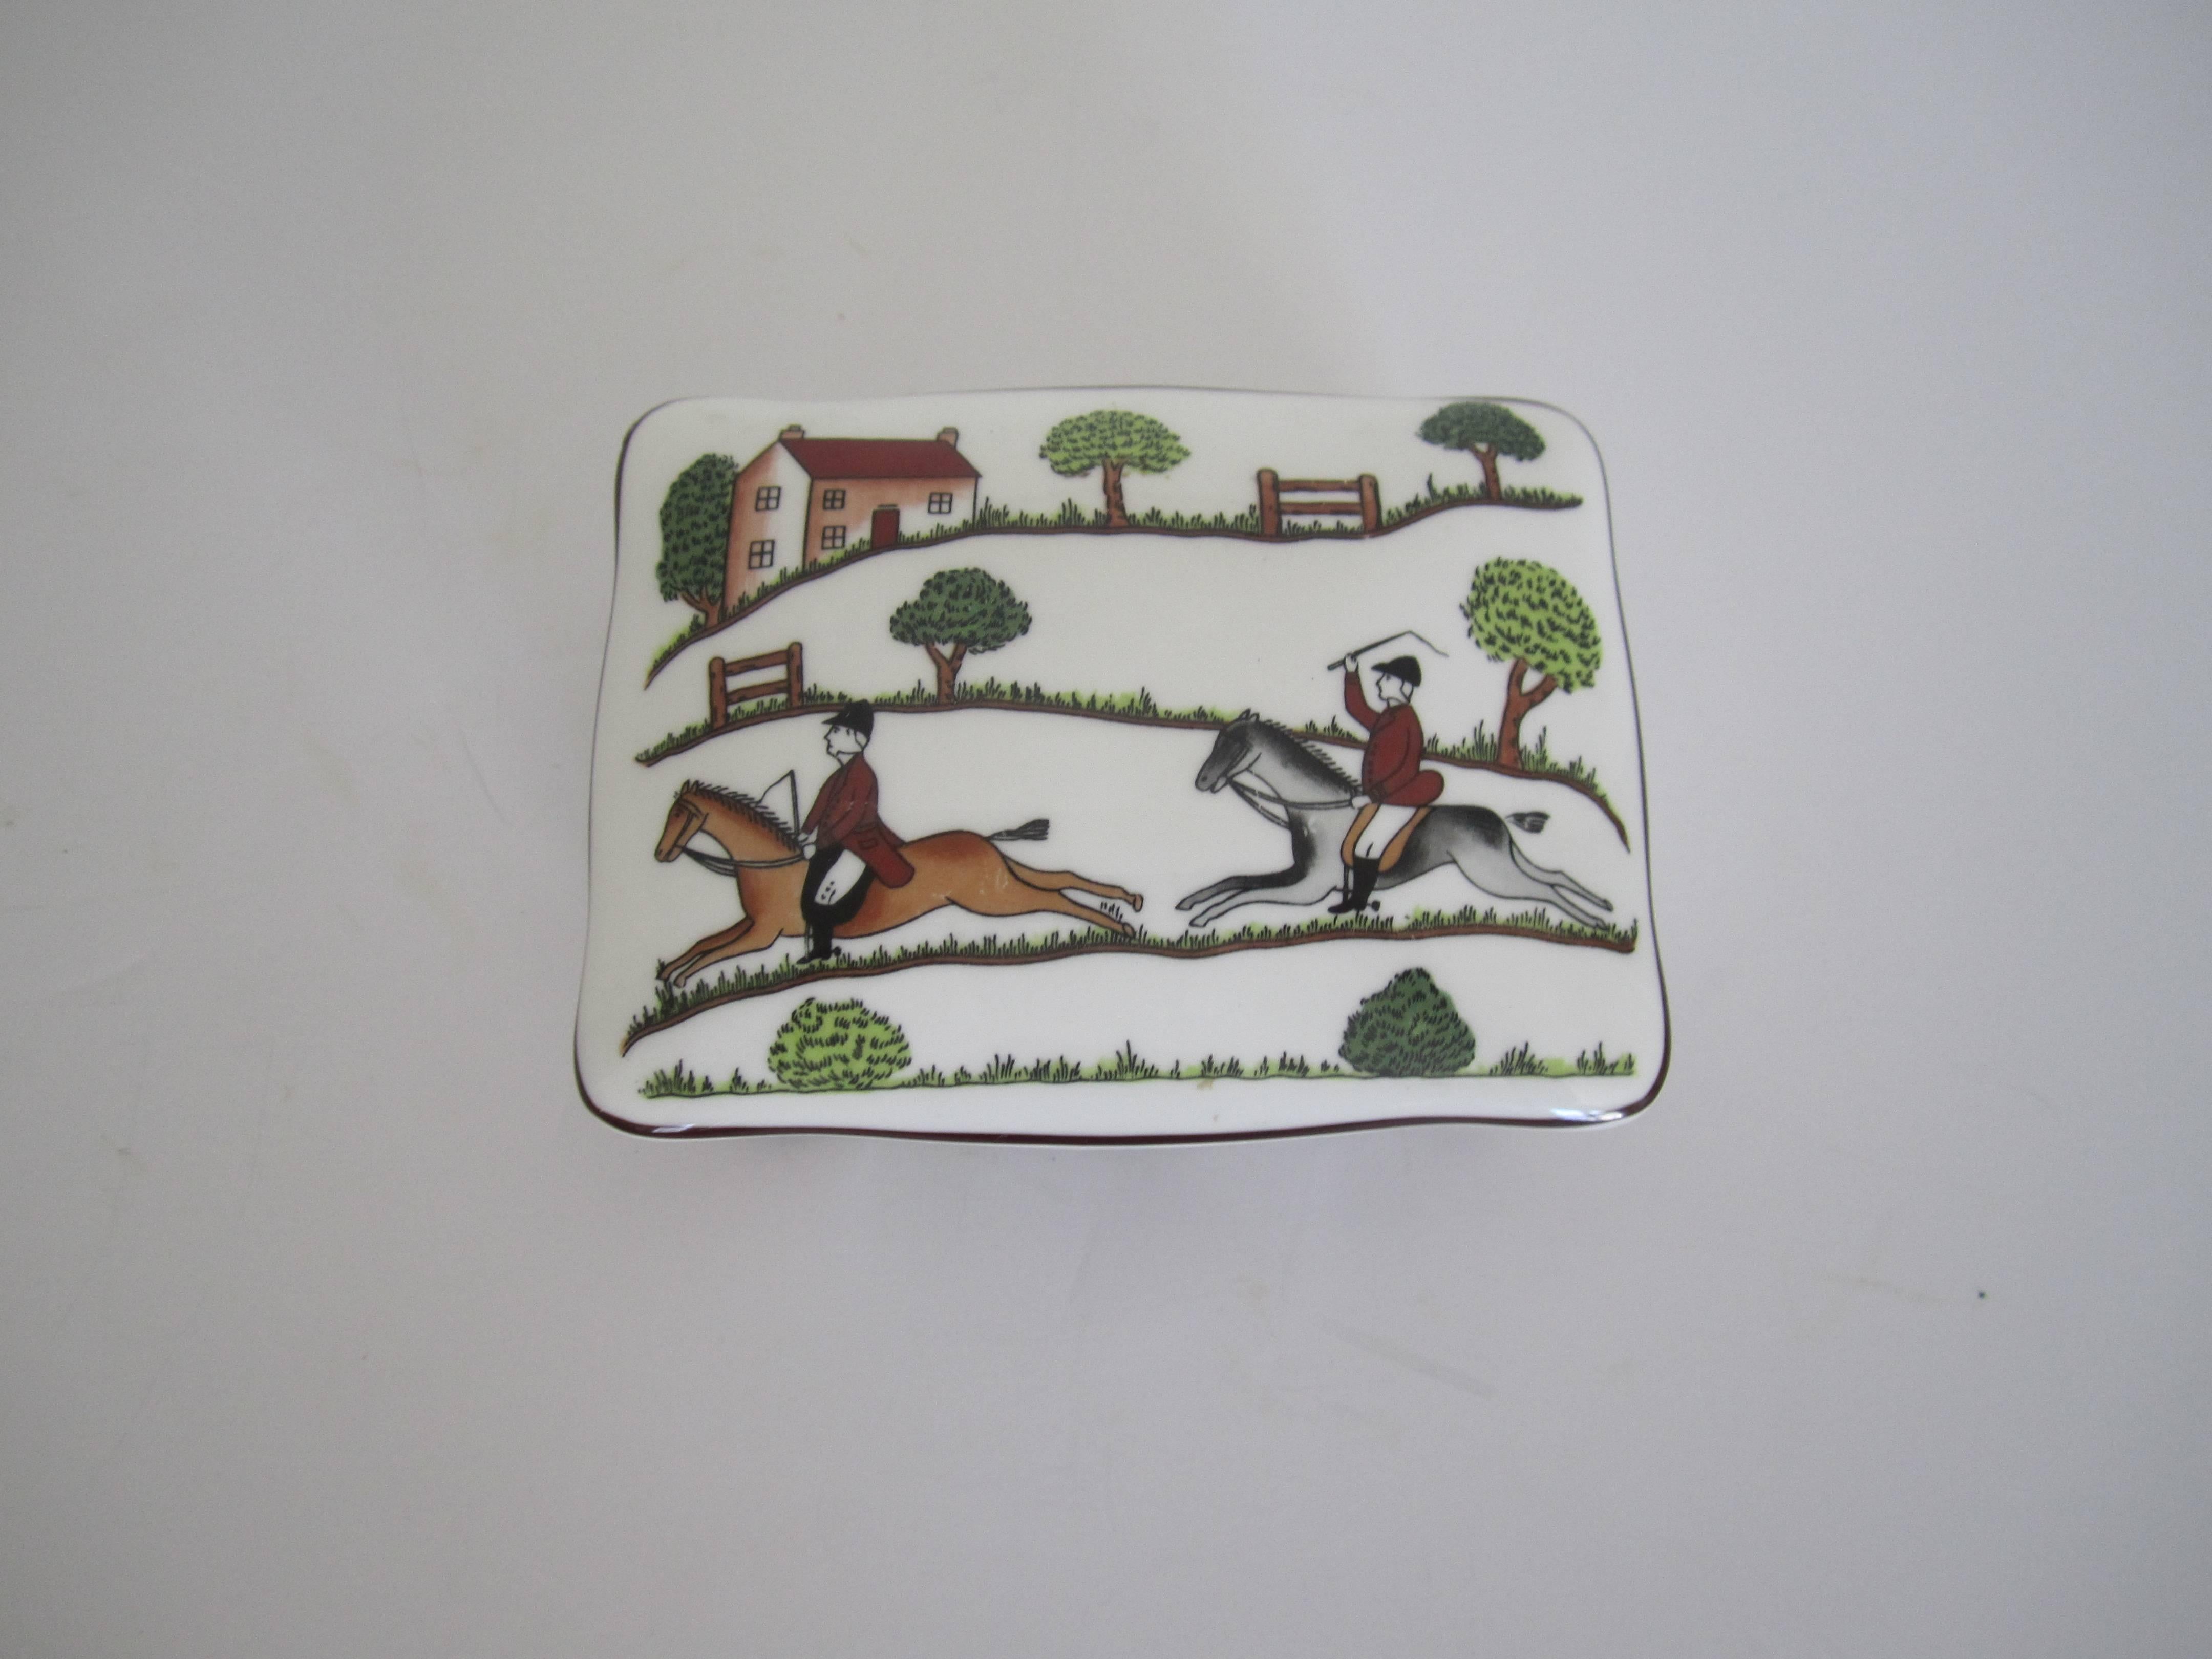 English Equestrian Horse Hunting Scene Box in the Style of Hermès